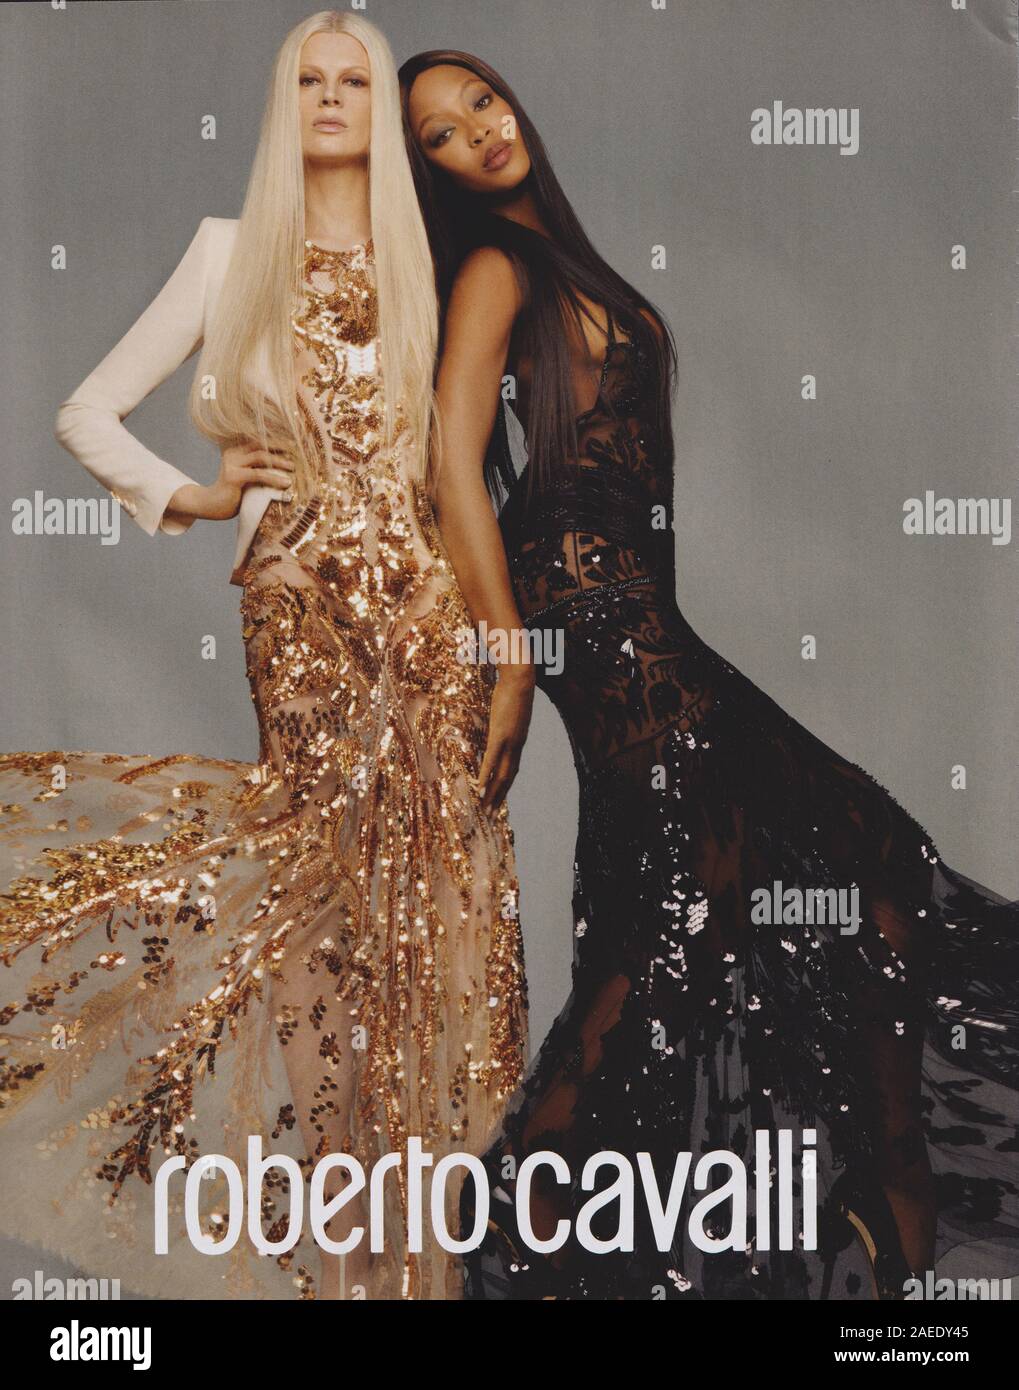 poster advertising Roberto Cavalli fashion house in paper magazine from ...